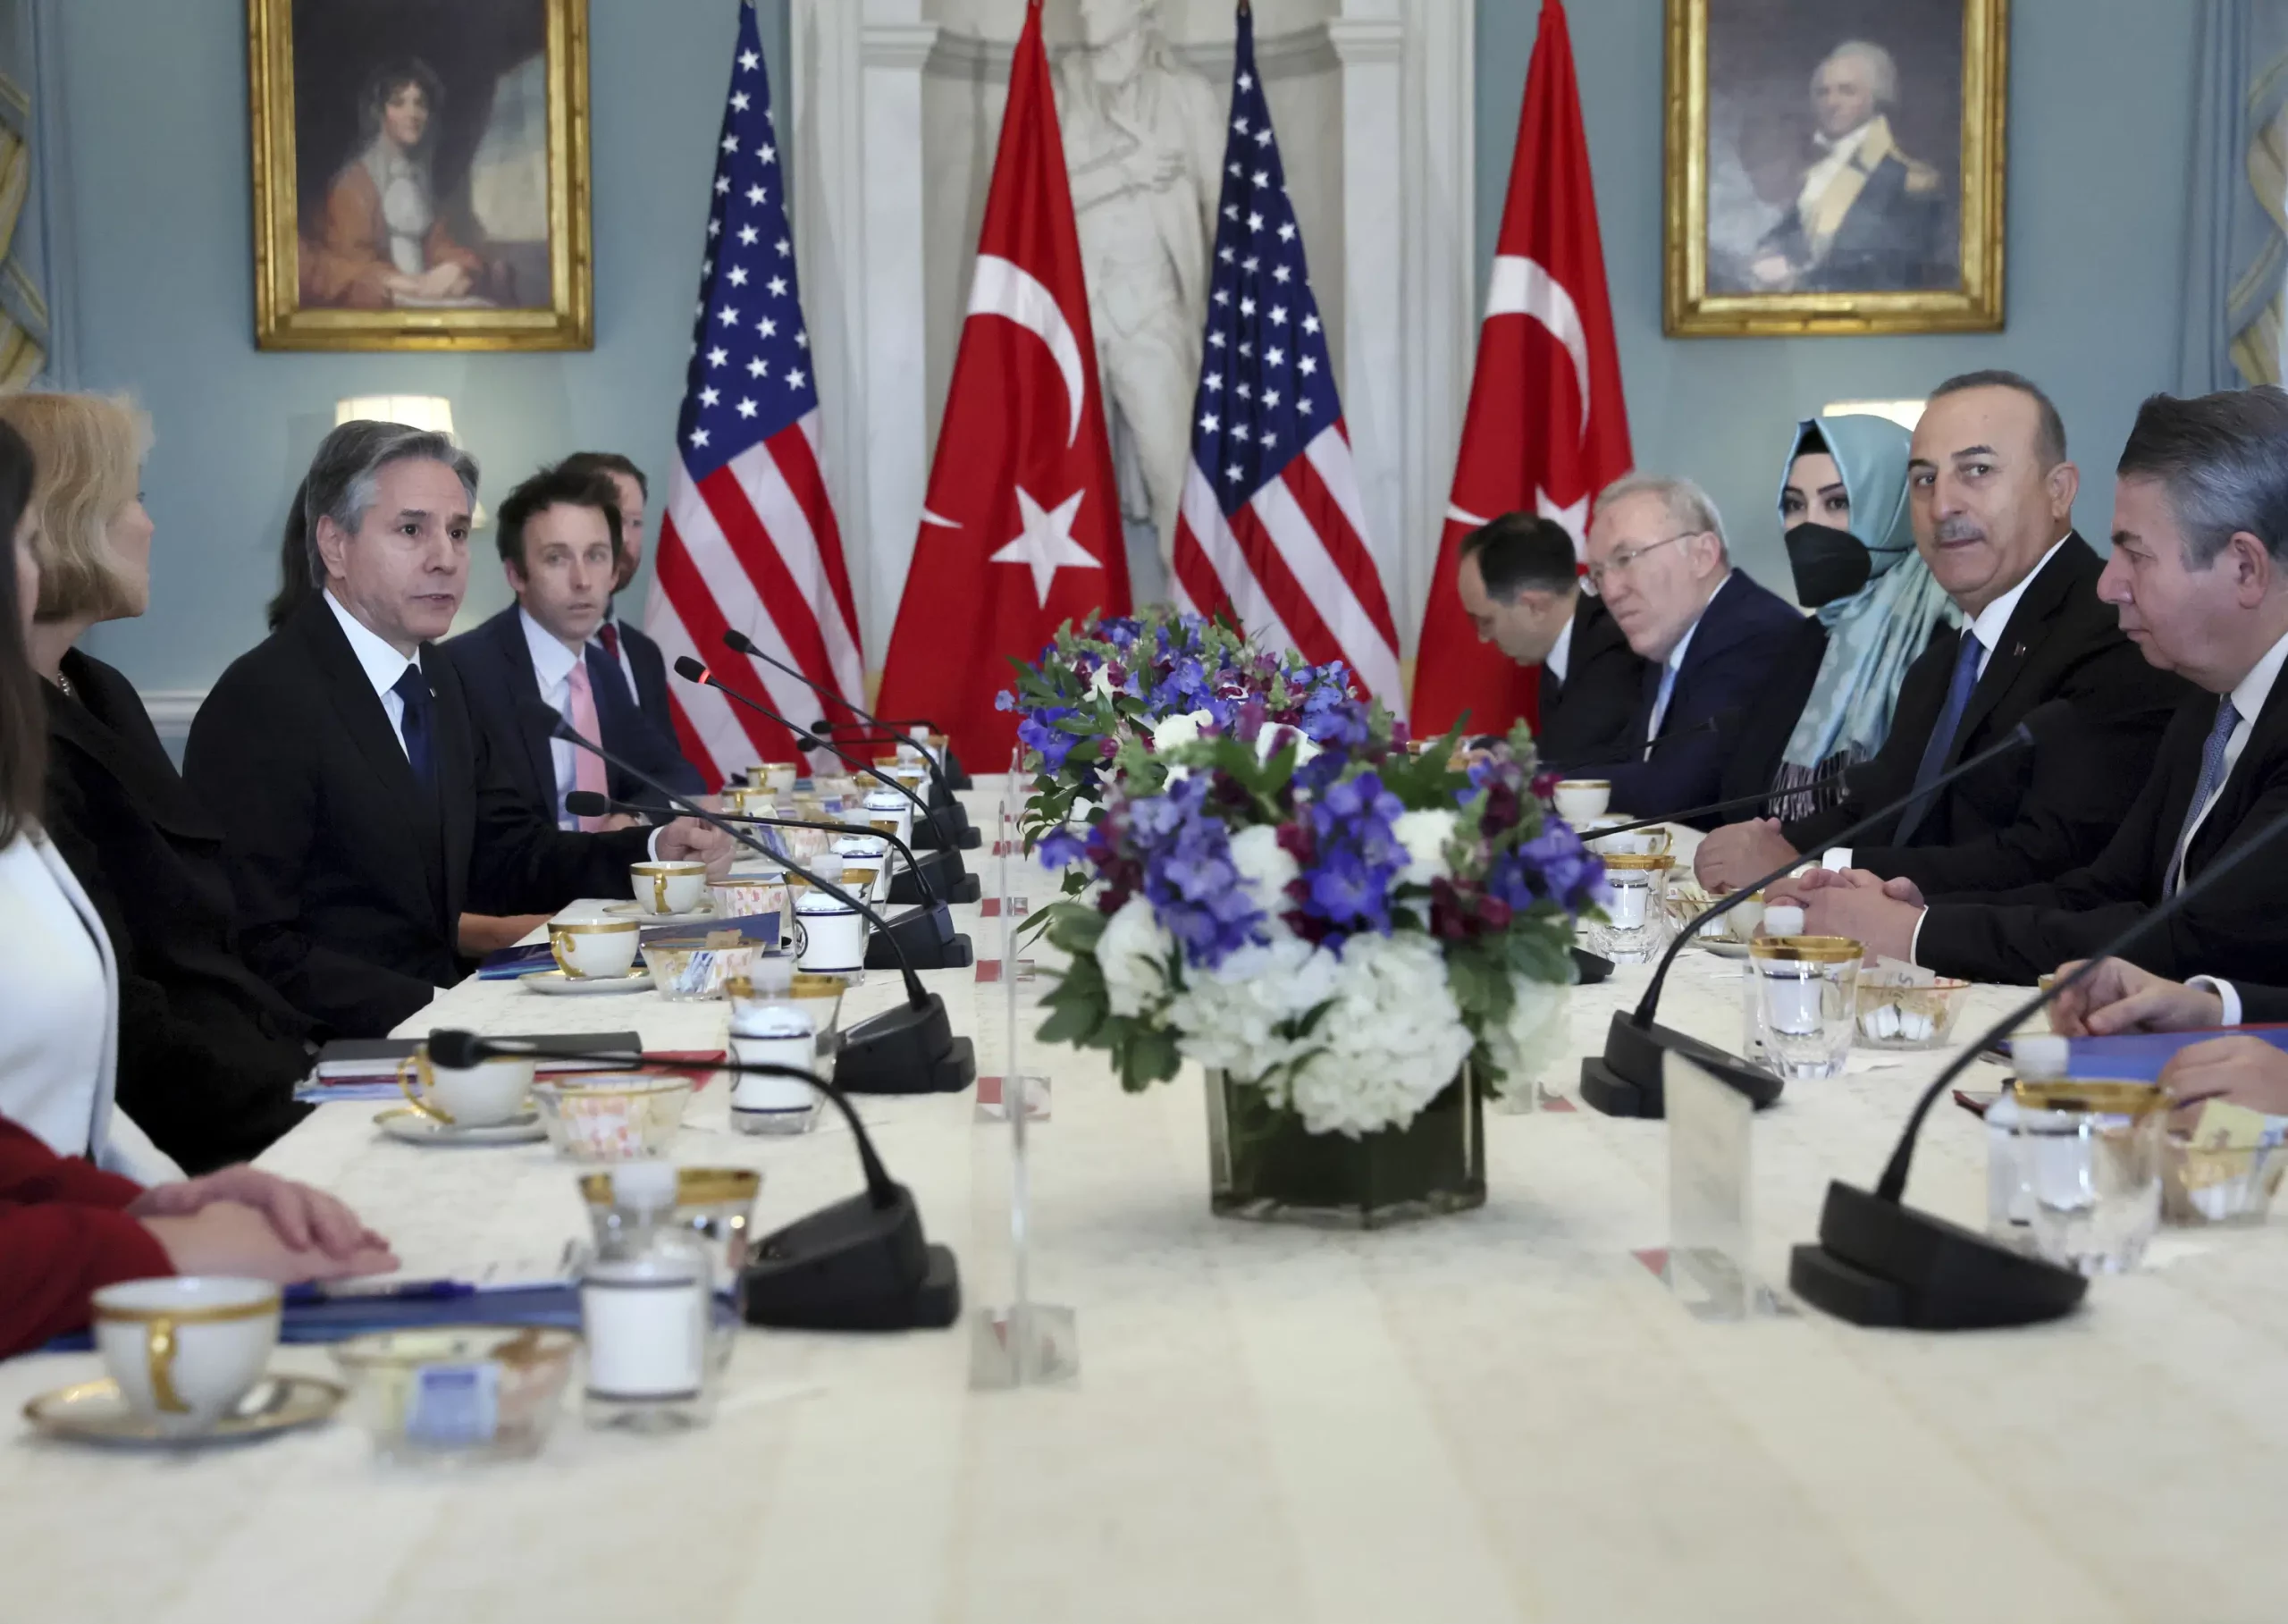 NATO allies US, Turkey try to mend fences but rifts persist 16